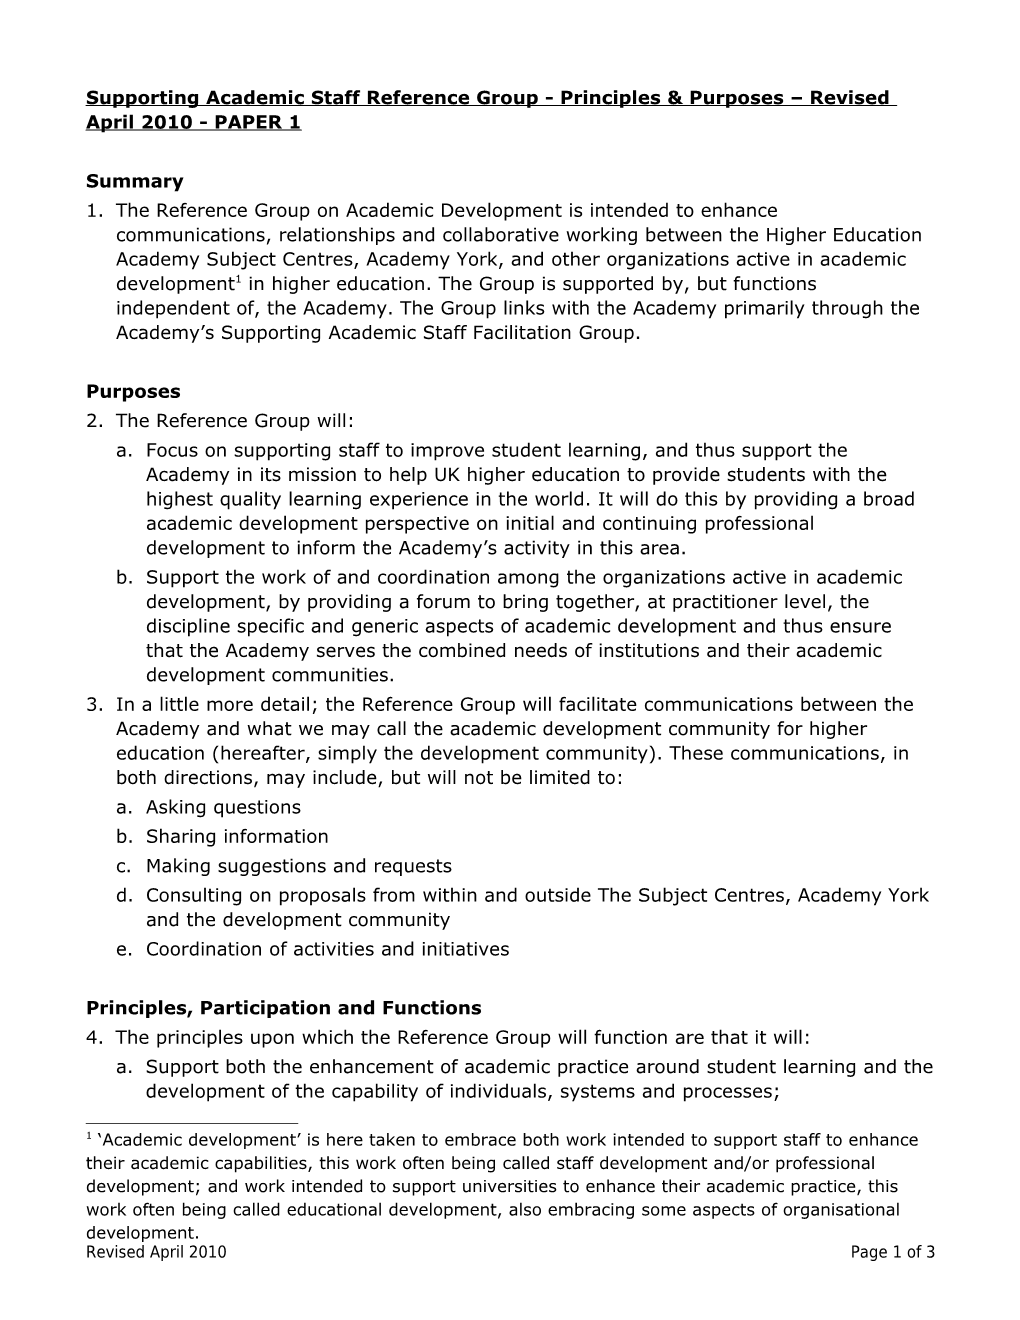 Supporting Academic Staff Reference Group - Principles Purposes Revised April 2010 - PAPER 1